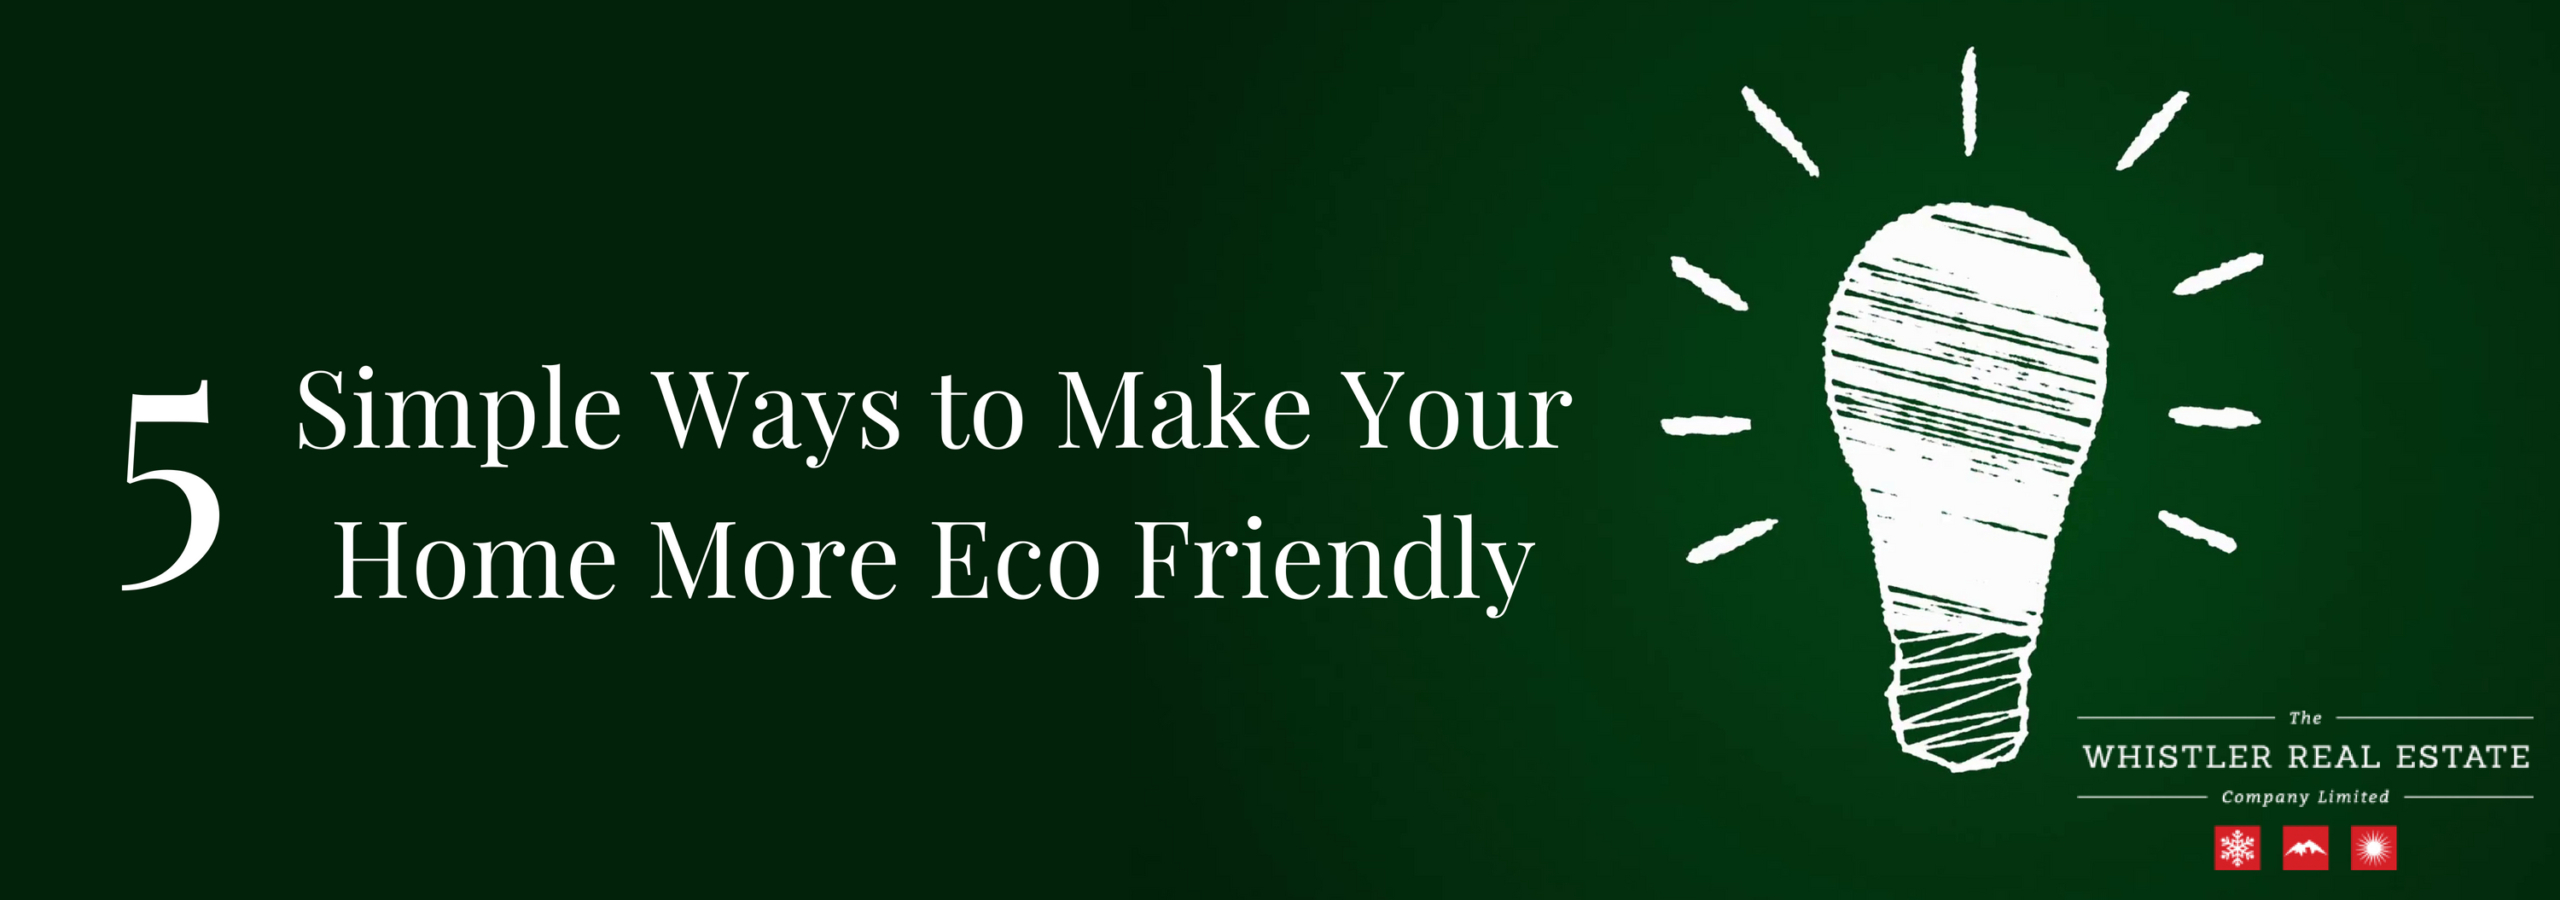 5 simple ways to make your whistler home more eco friendly